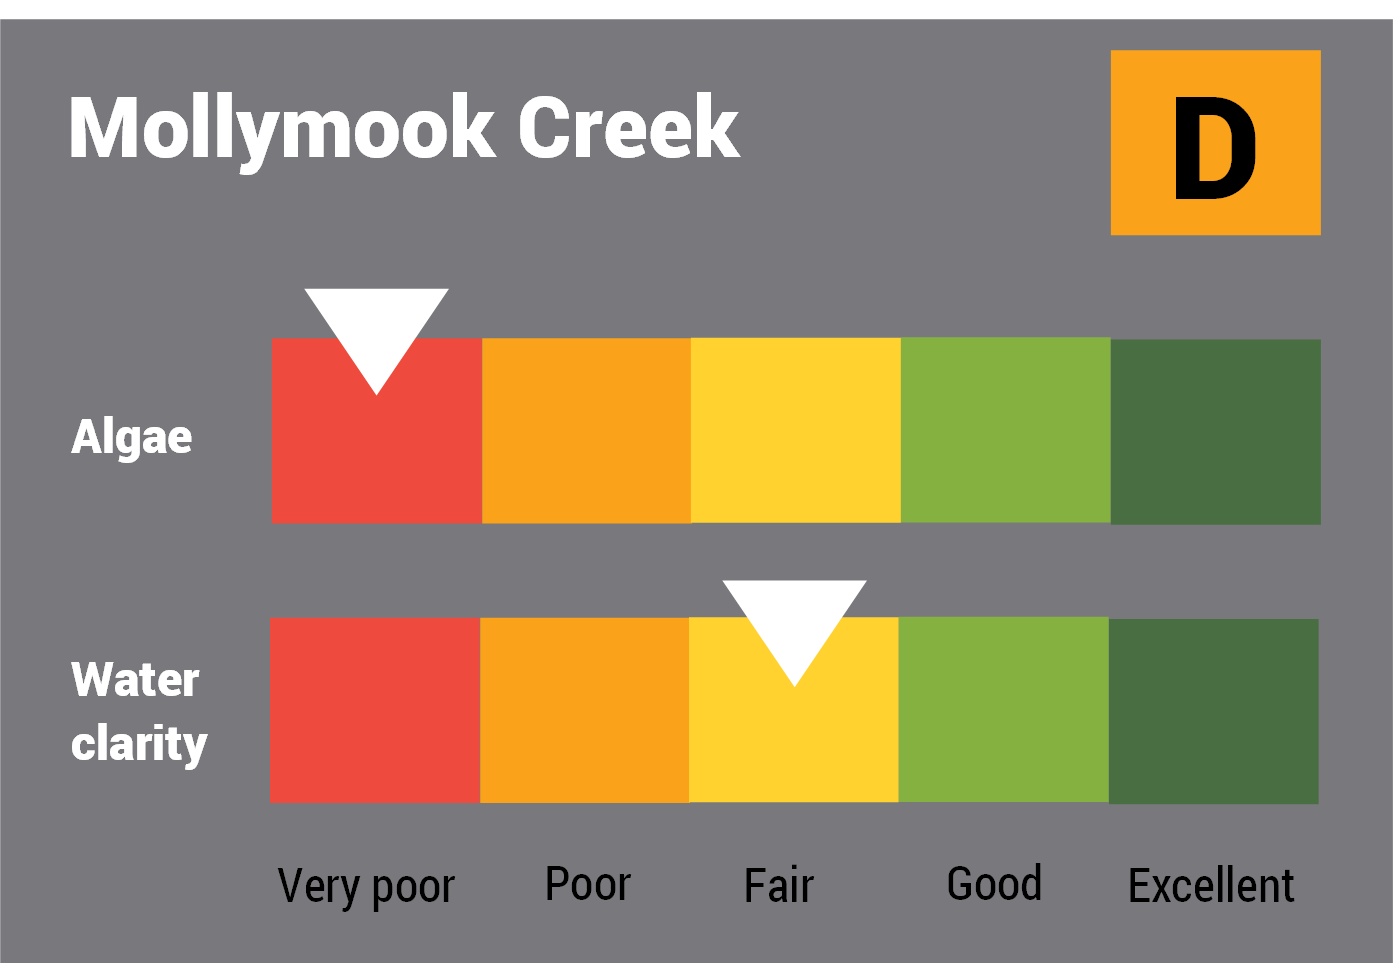 Mollymook Creek water quality report card for algae and water clarity showing colour-coded ratings (red, orange, yellow, light green and dark green, which represent very poor, poor, fair, good and excellent, respectively). Algae is rated 'very poor' and water clarity is rated 'poor' giving an overall rating of 'very poor' or 'E'.